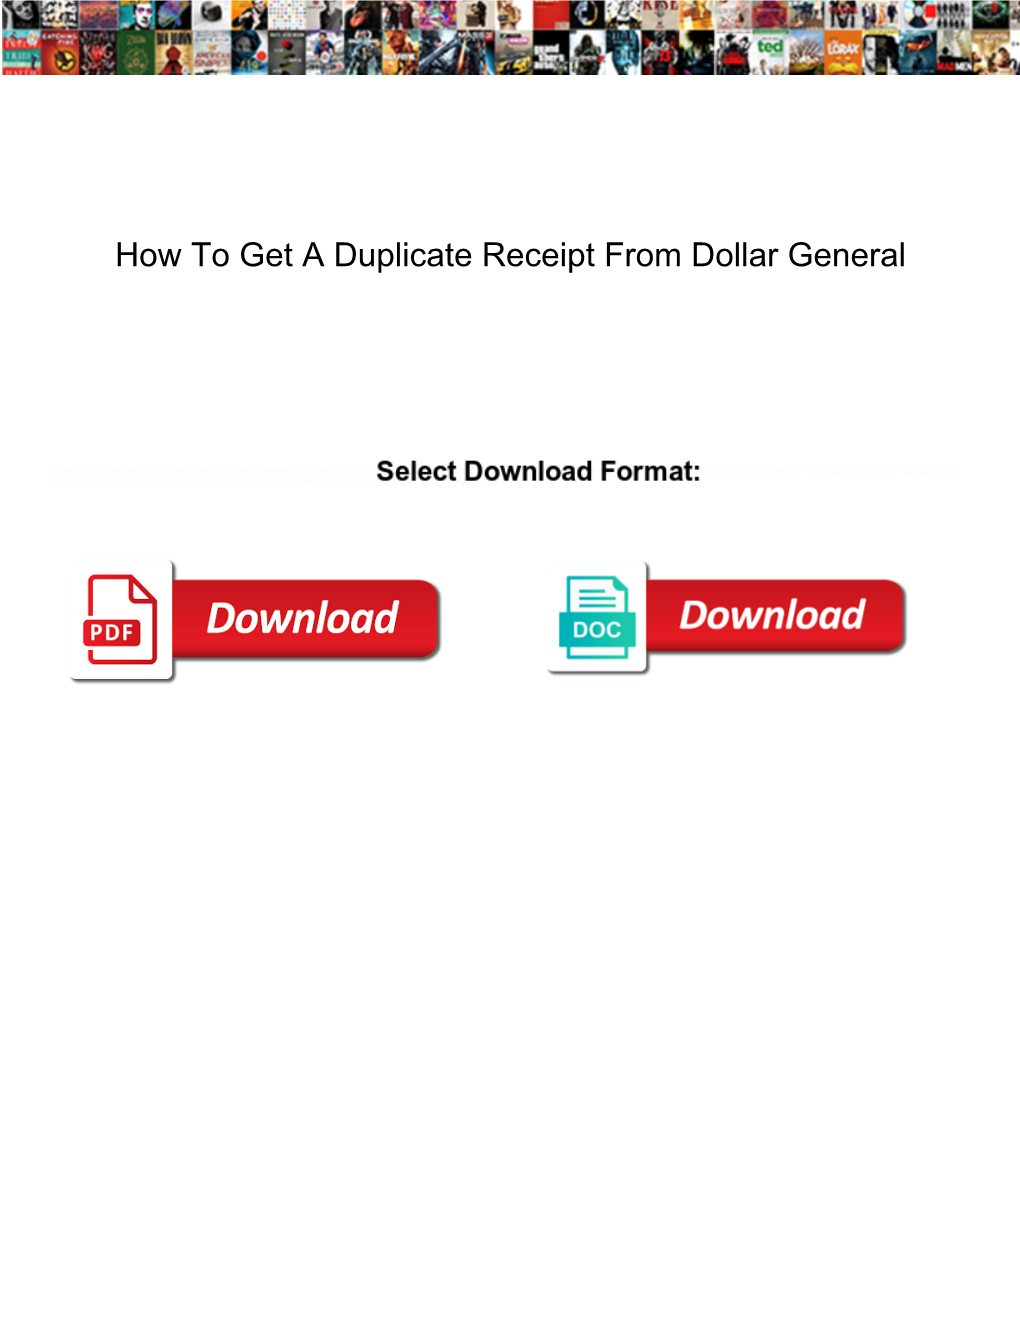 How to Get a Duplicate Receipt from Dollar General